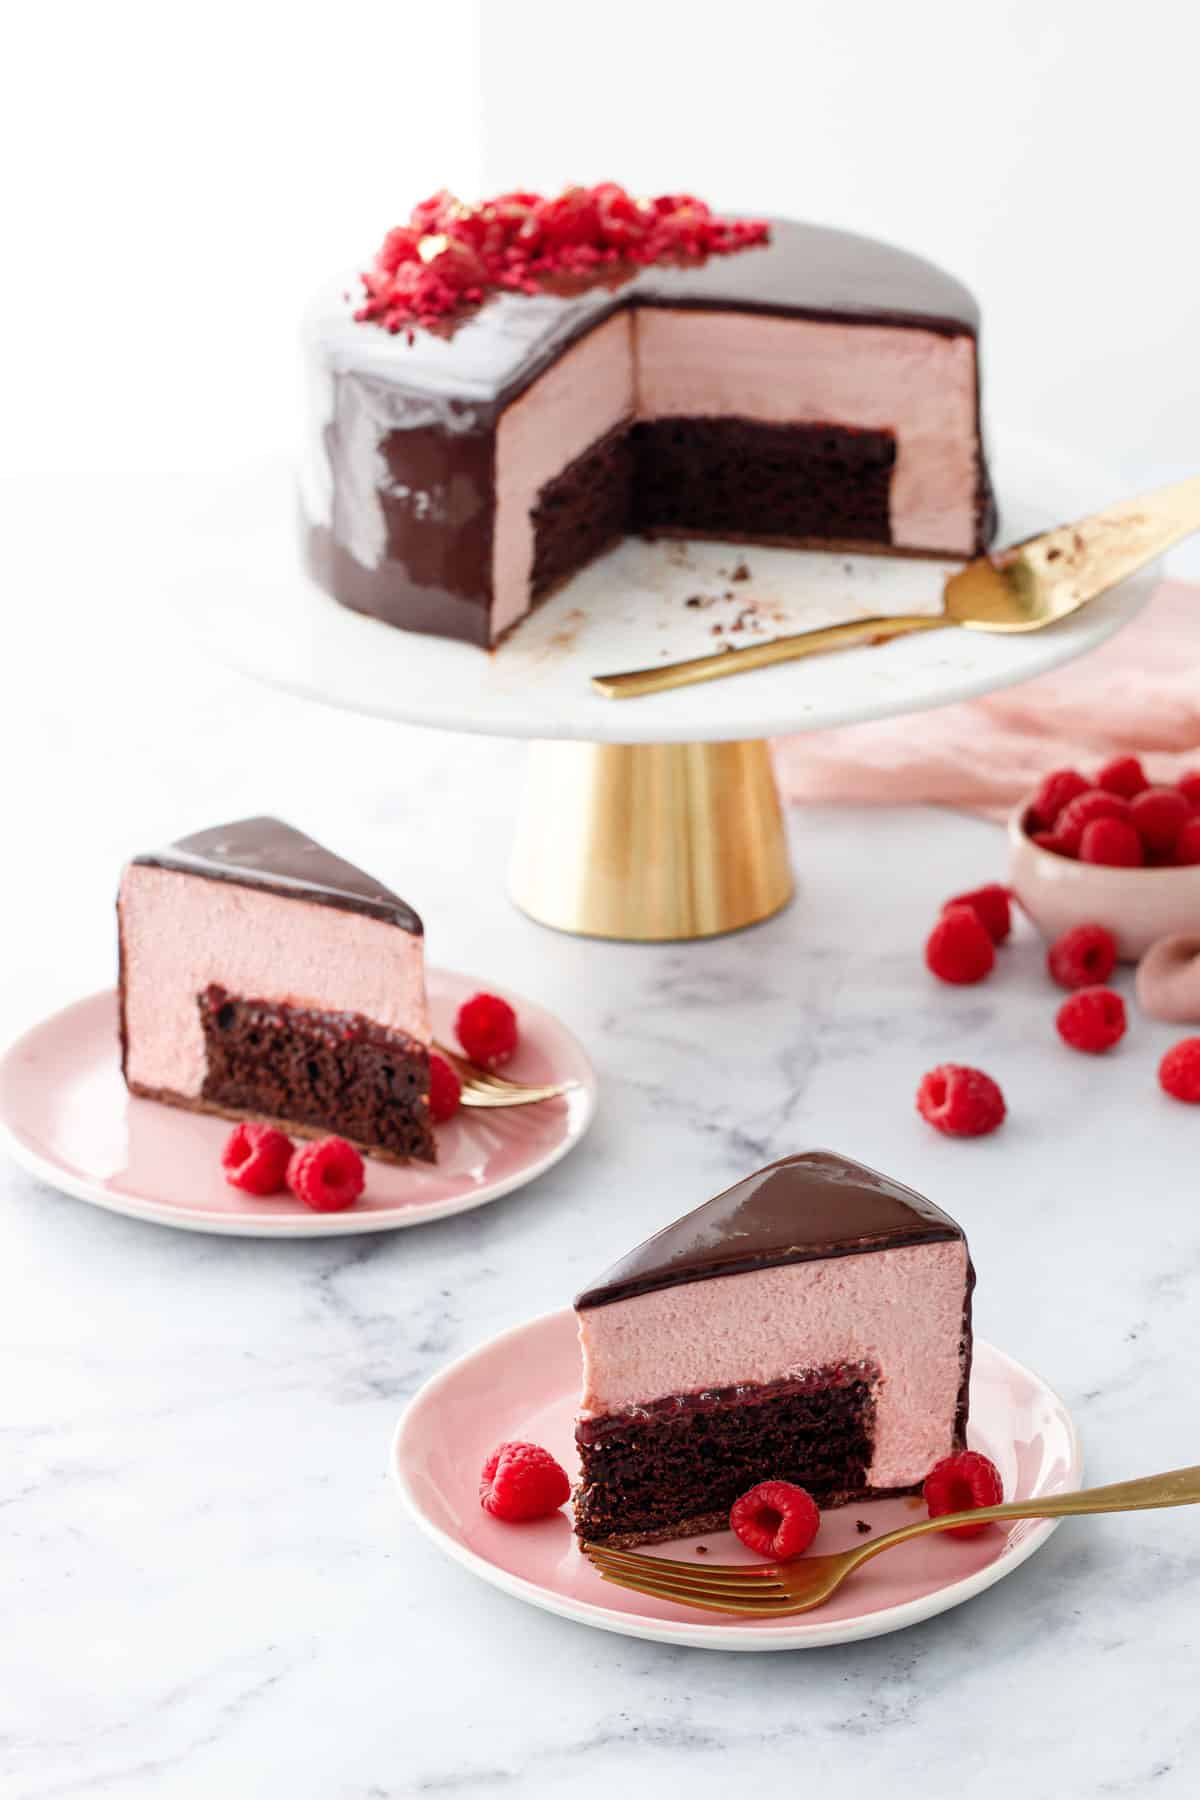 Two slices of Chocolate Raspberry Mousse Cake on pink plates, with the whole cut cake on a gold and marble cake stand in the background, with bowl of raspberries on the side.